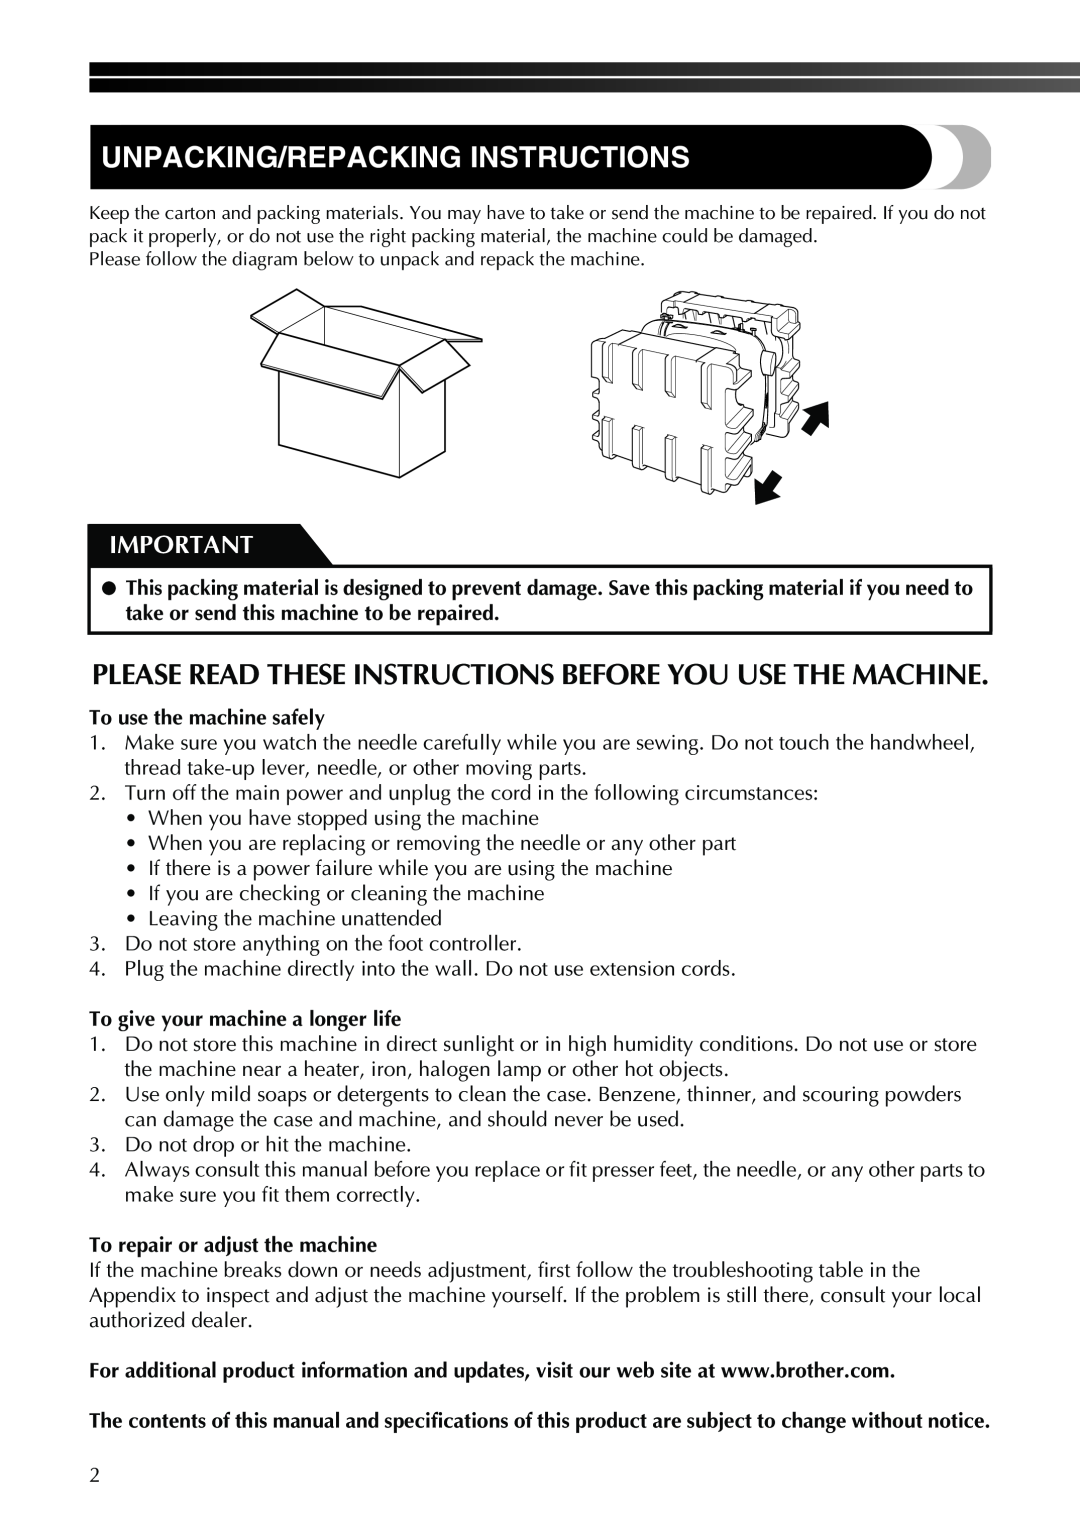 Brother XL-2610i, XL-3520i Unpacking/Repacking Instructions, Please Read These Instructions Before You Use The Machine 